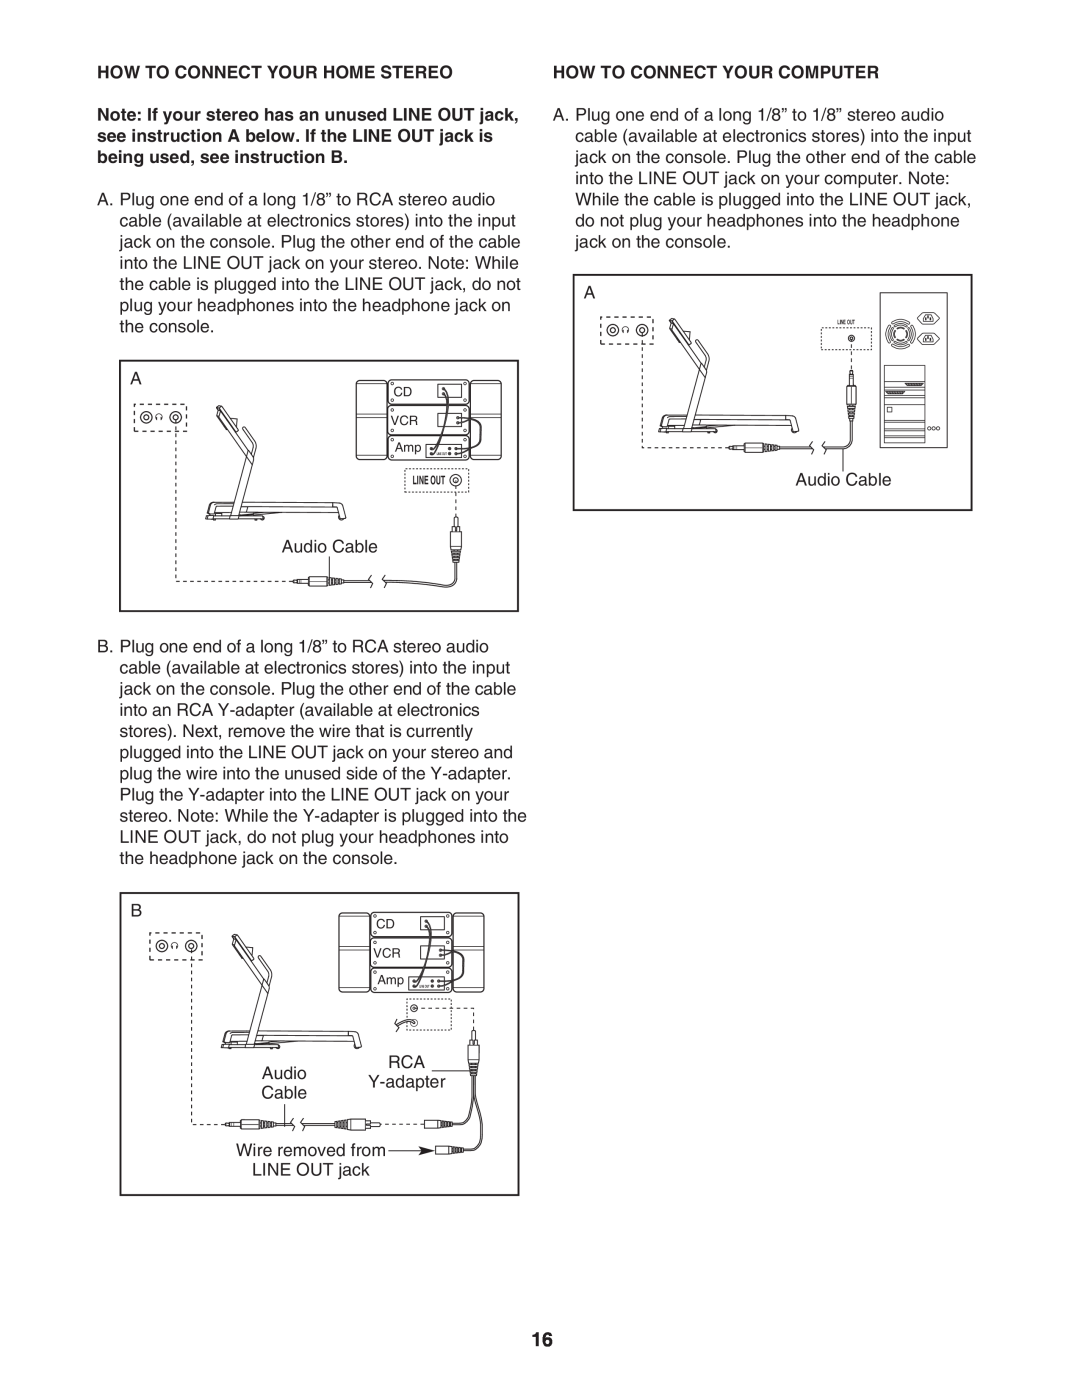 ProForm 831.29675.0 user manual How To Connect Your Home Stereo, How To Connect Your Computer, Line Out 